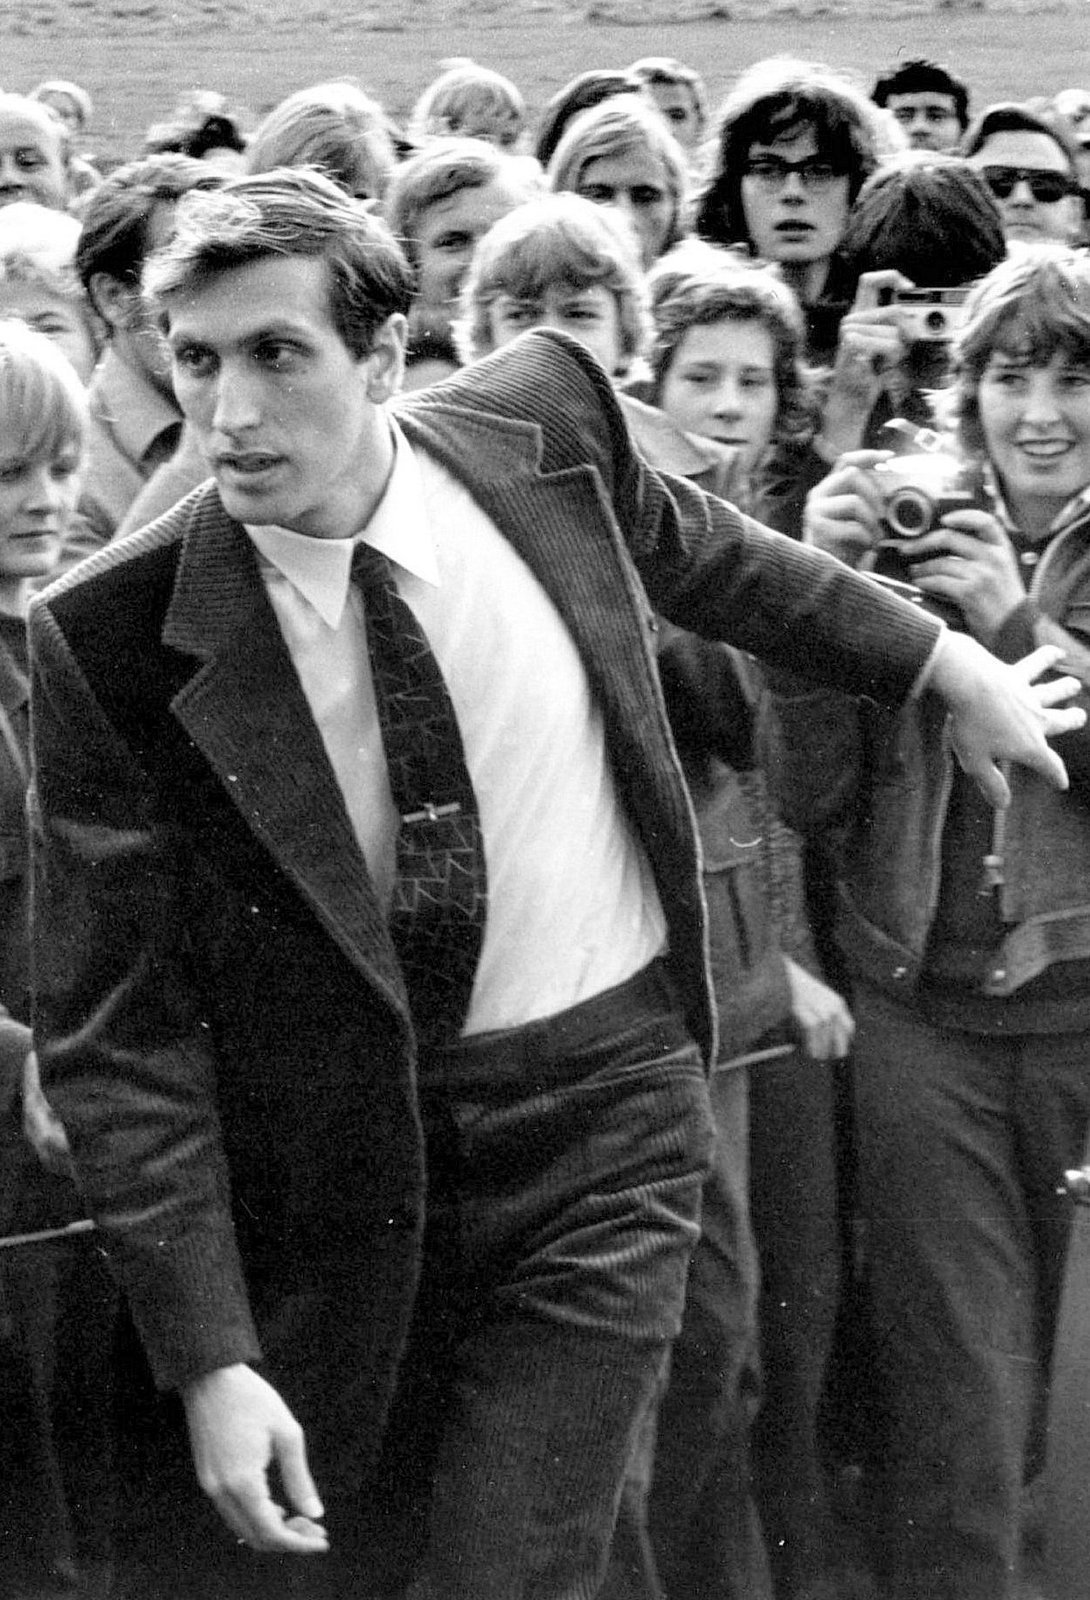 Bobby Fischer's body exhumed over paternity row, Iceland